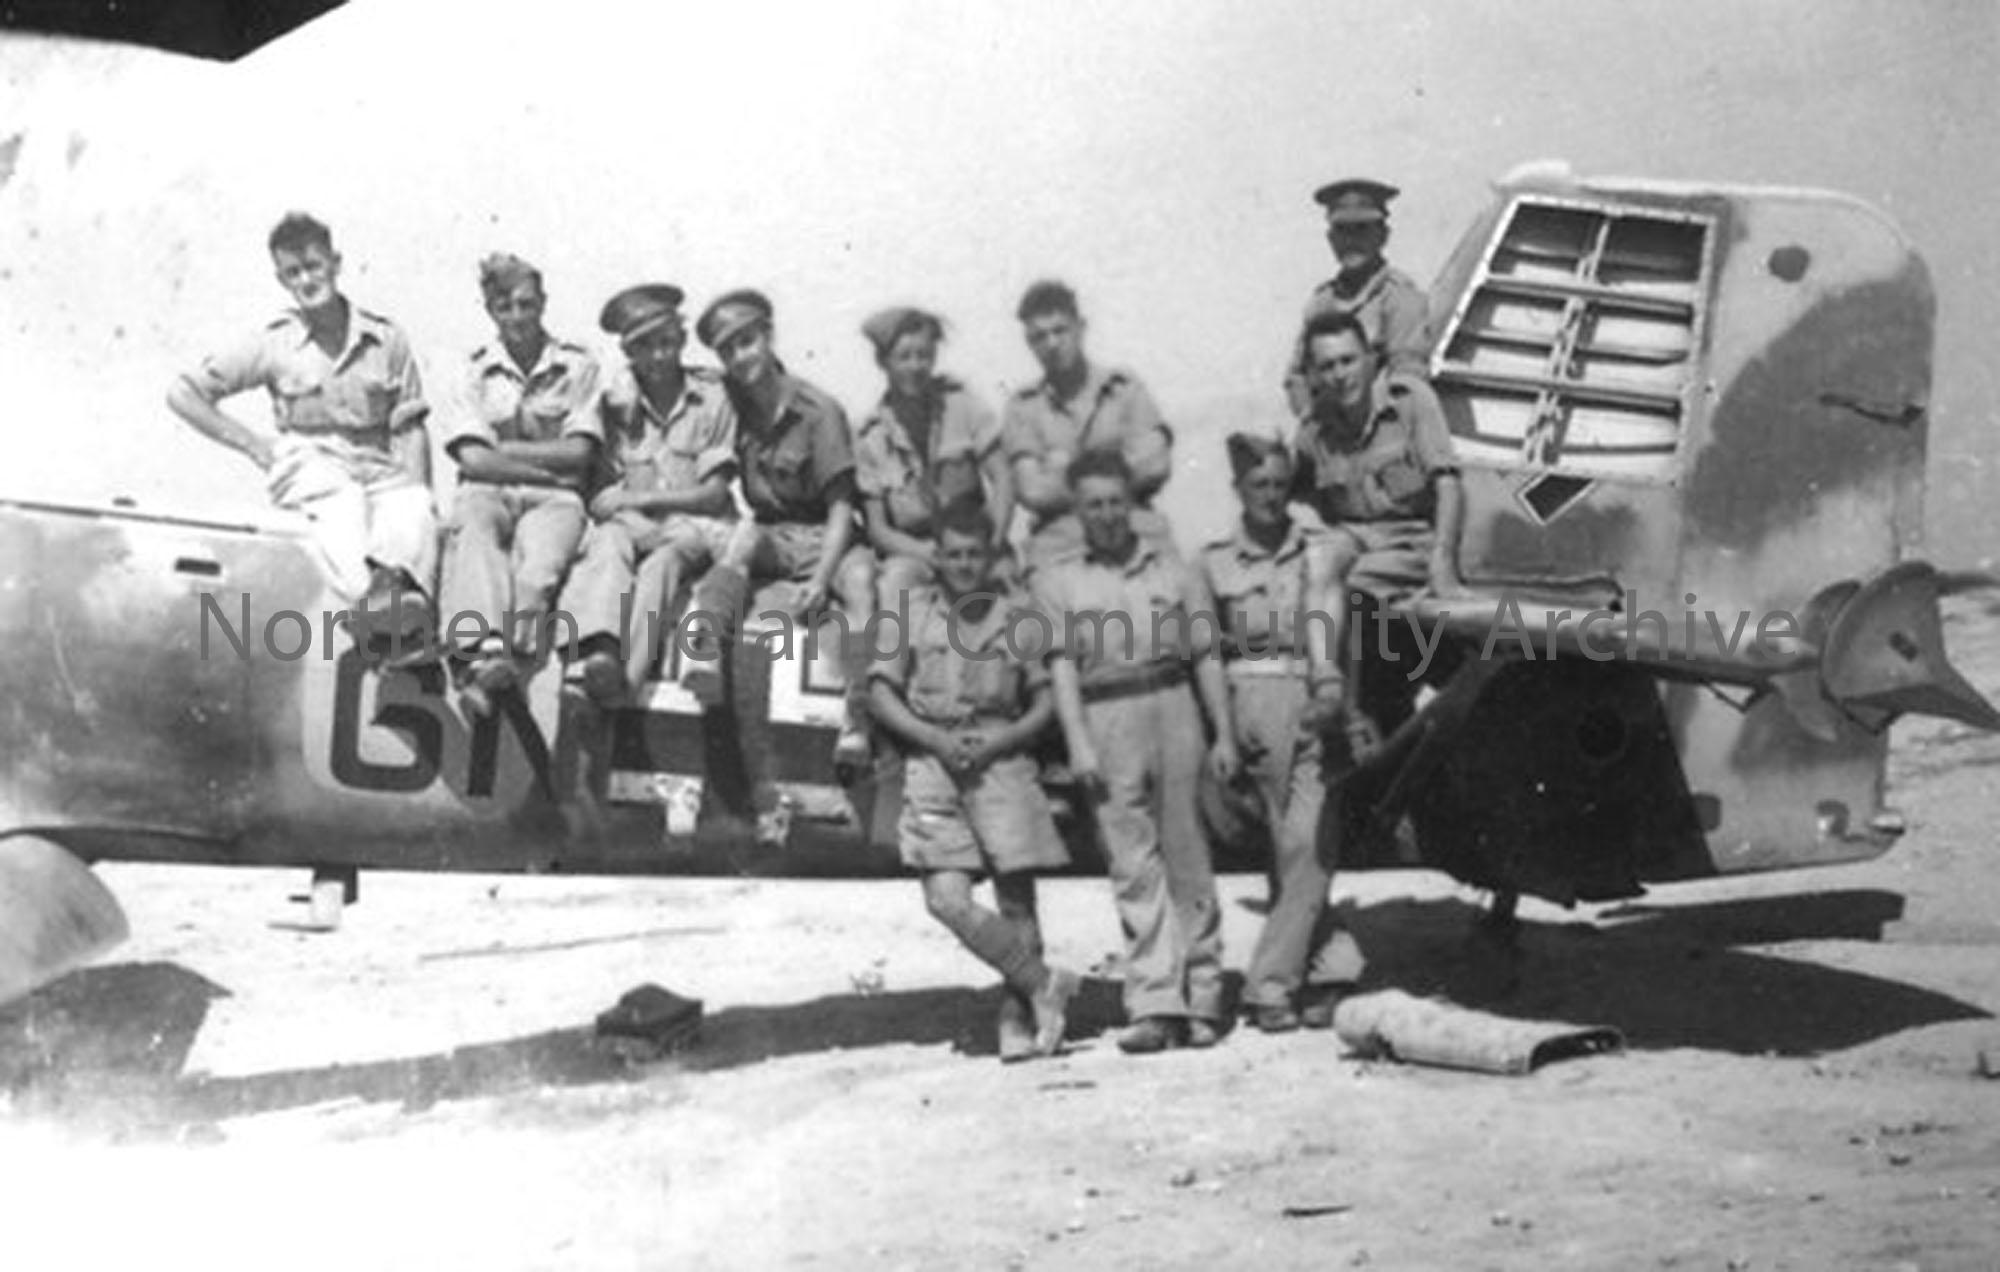 Soldiers sitting on an aircraft